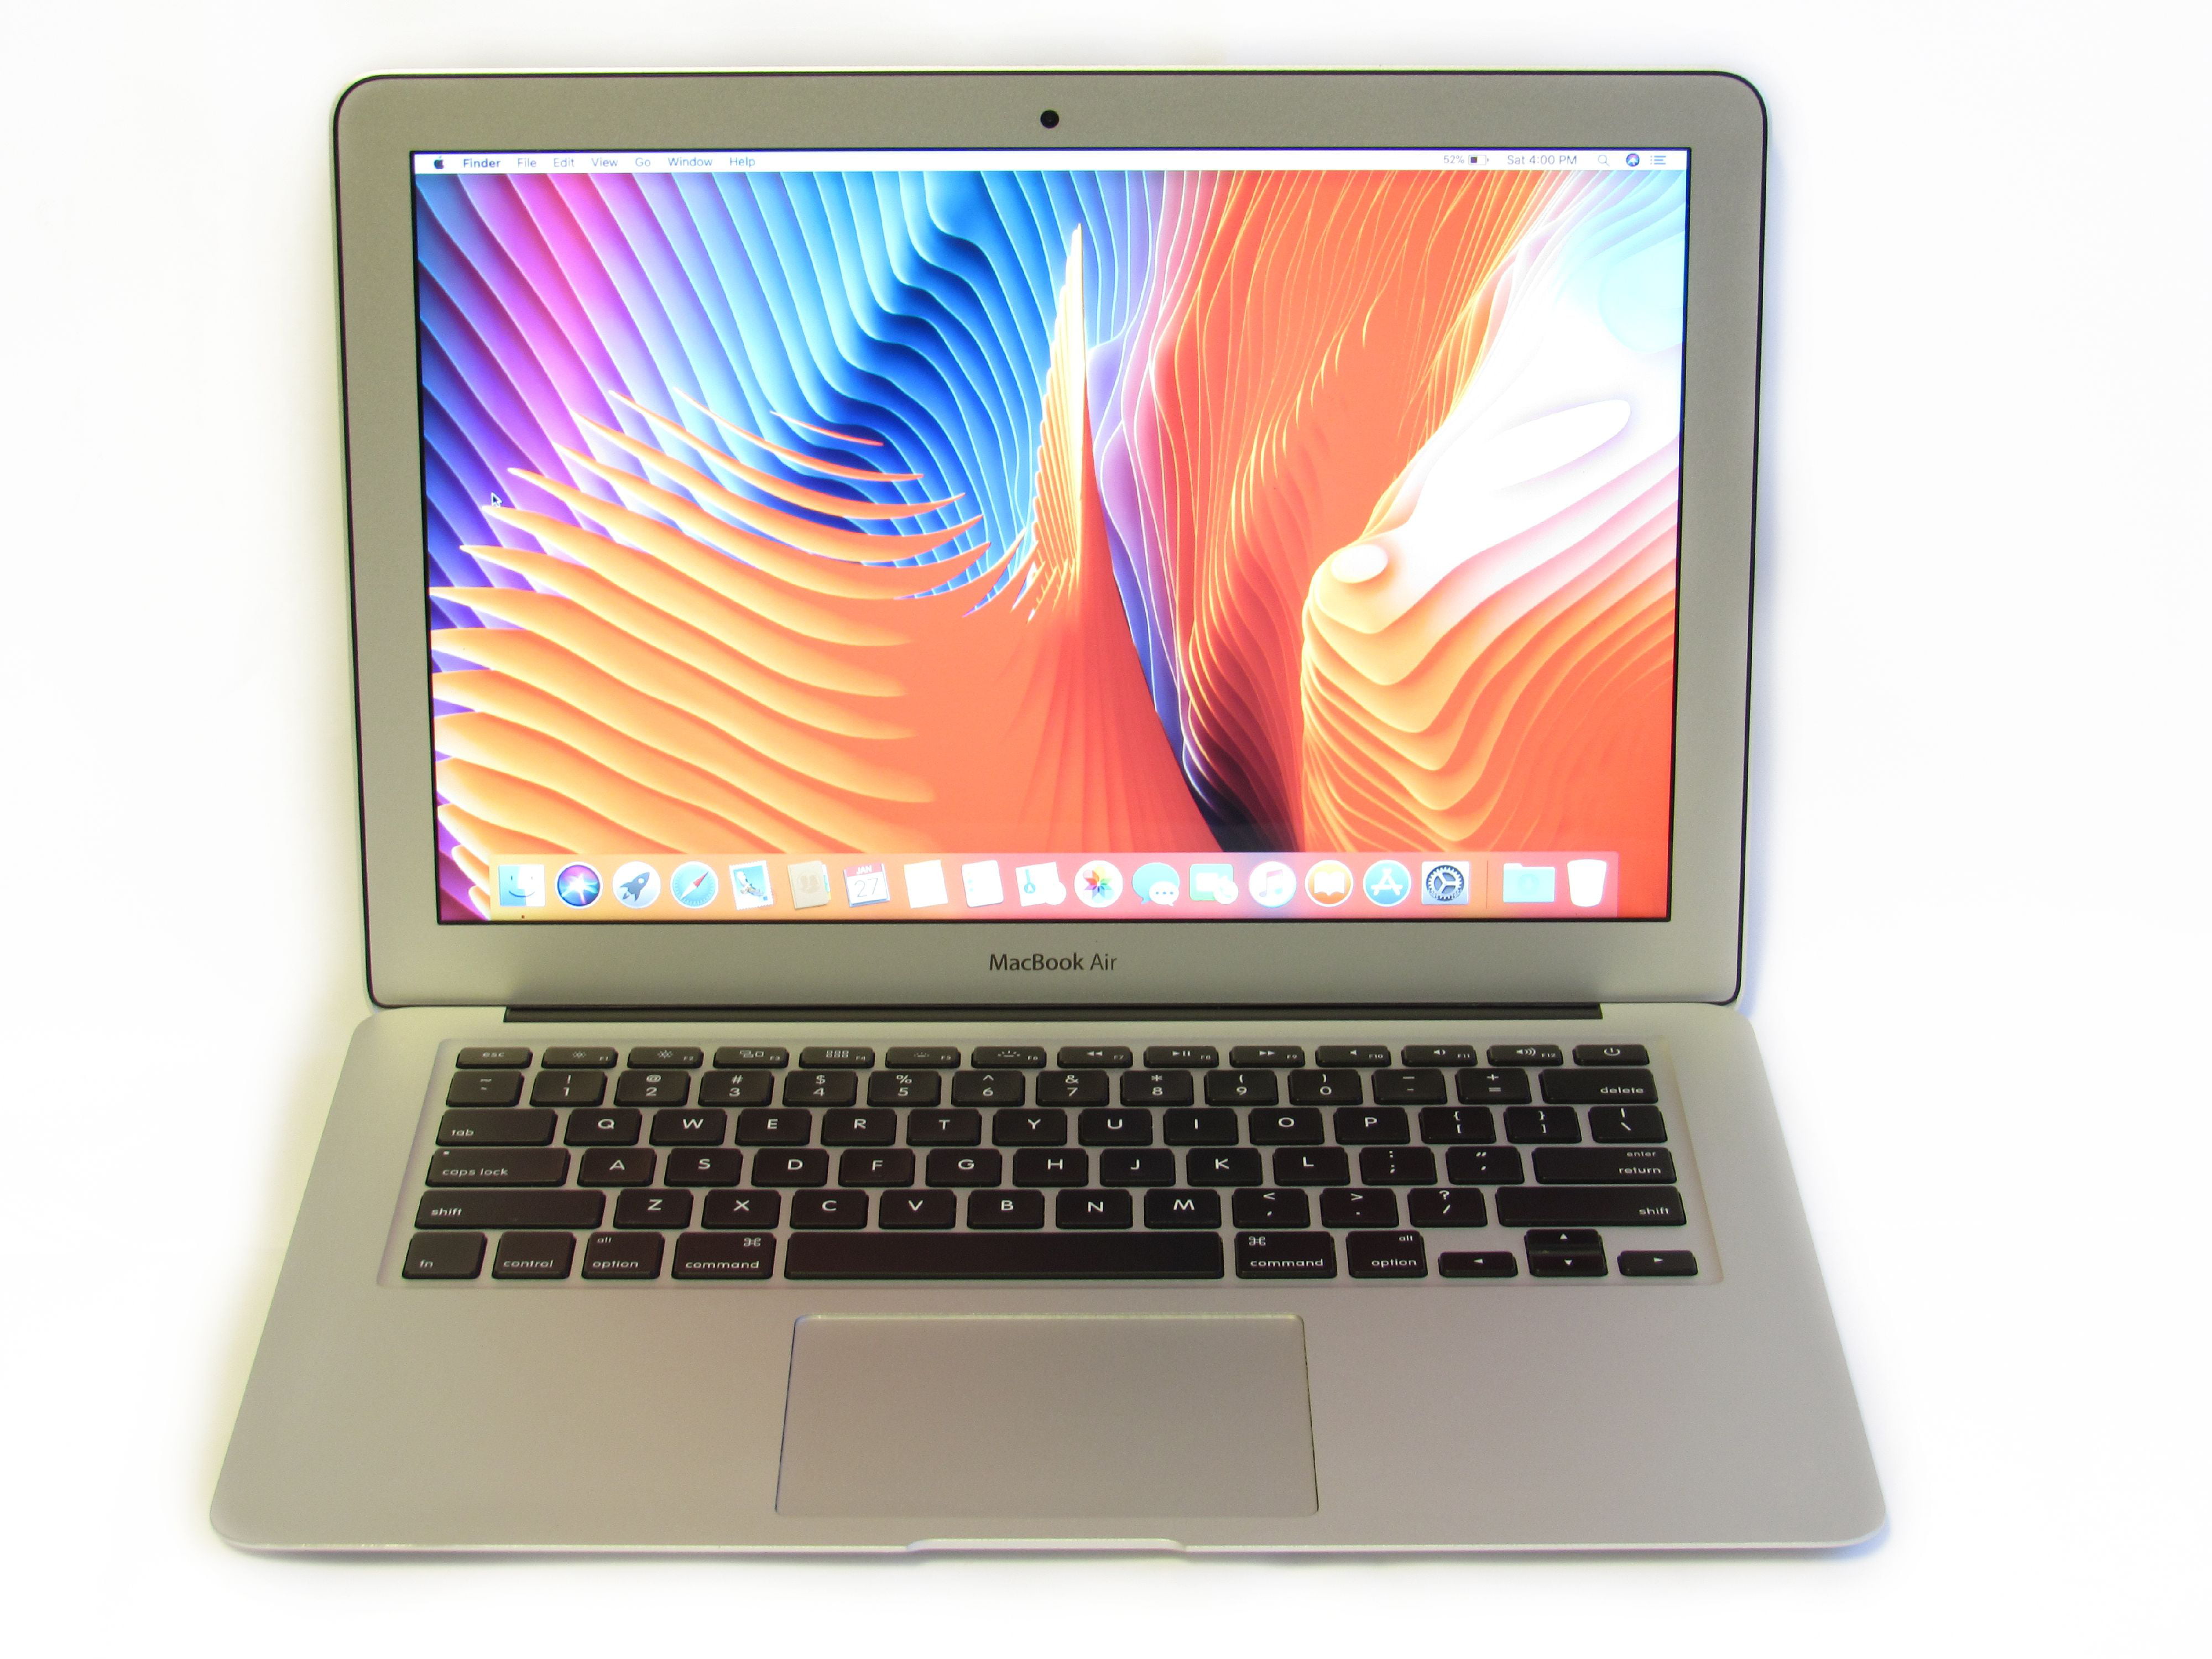 Foresee Eastern atmosphere NEW (Latest 2017) Apple Macbook Air 13-Inch Laptop i5 1.8GHz - 2.9GHz/ 8GB  DDR3 RAM / 512GB SSD / HD Graphics 6000 / OS Mojave - Walmart.com